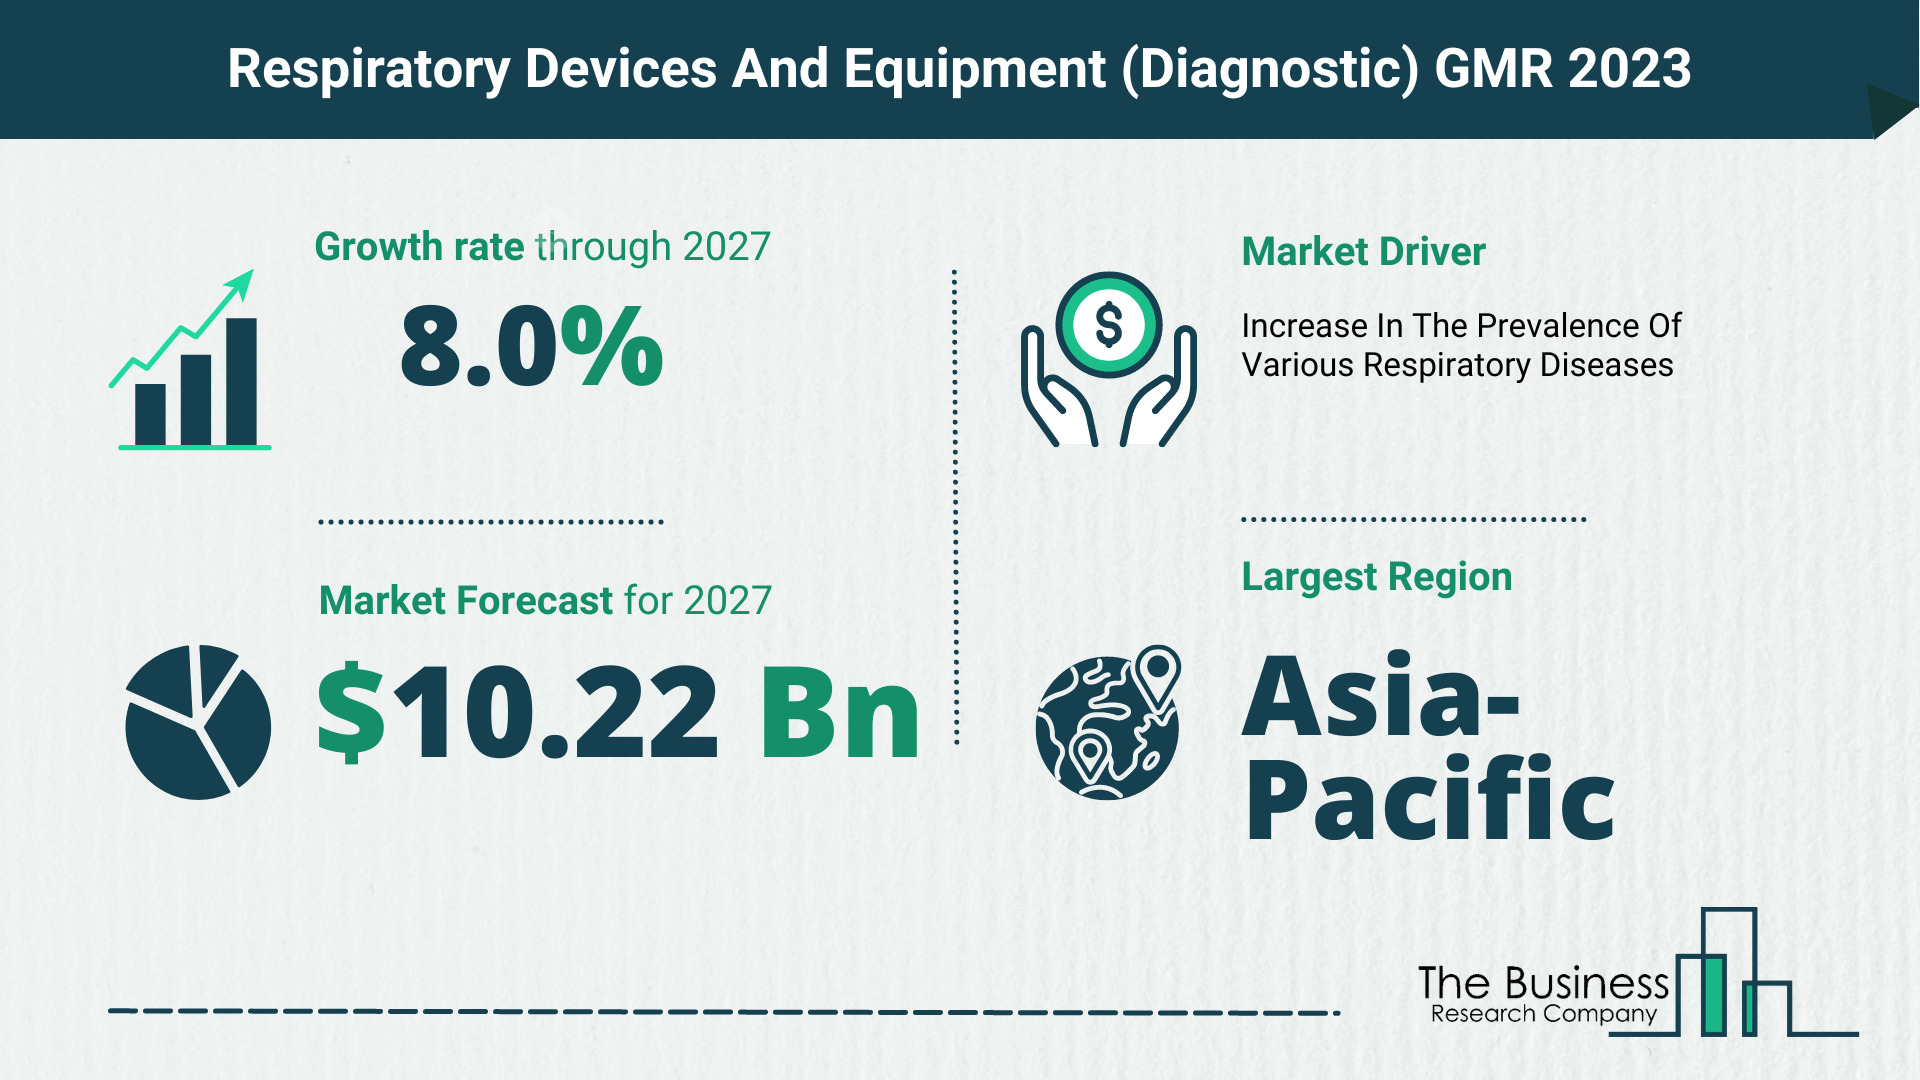 Respiratory Devices And Equipment (Diagnostic) Market Forecast 2023-2027 By The Business Research Company